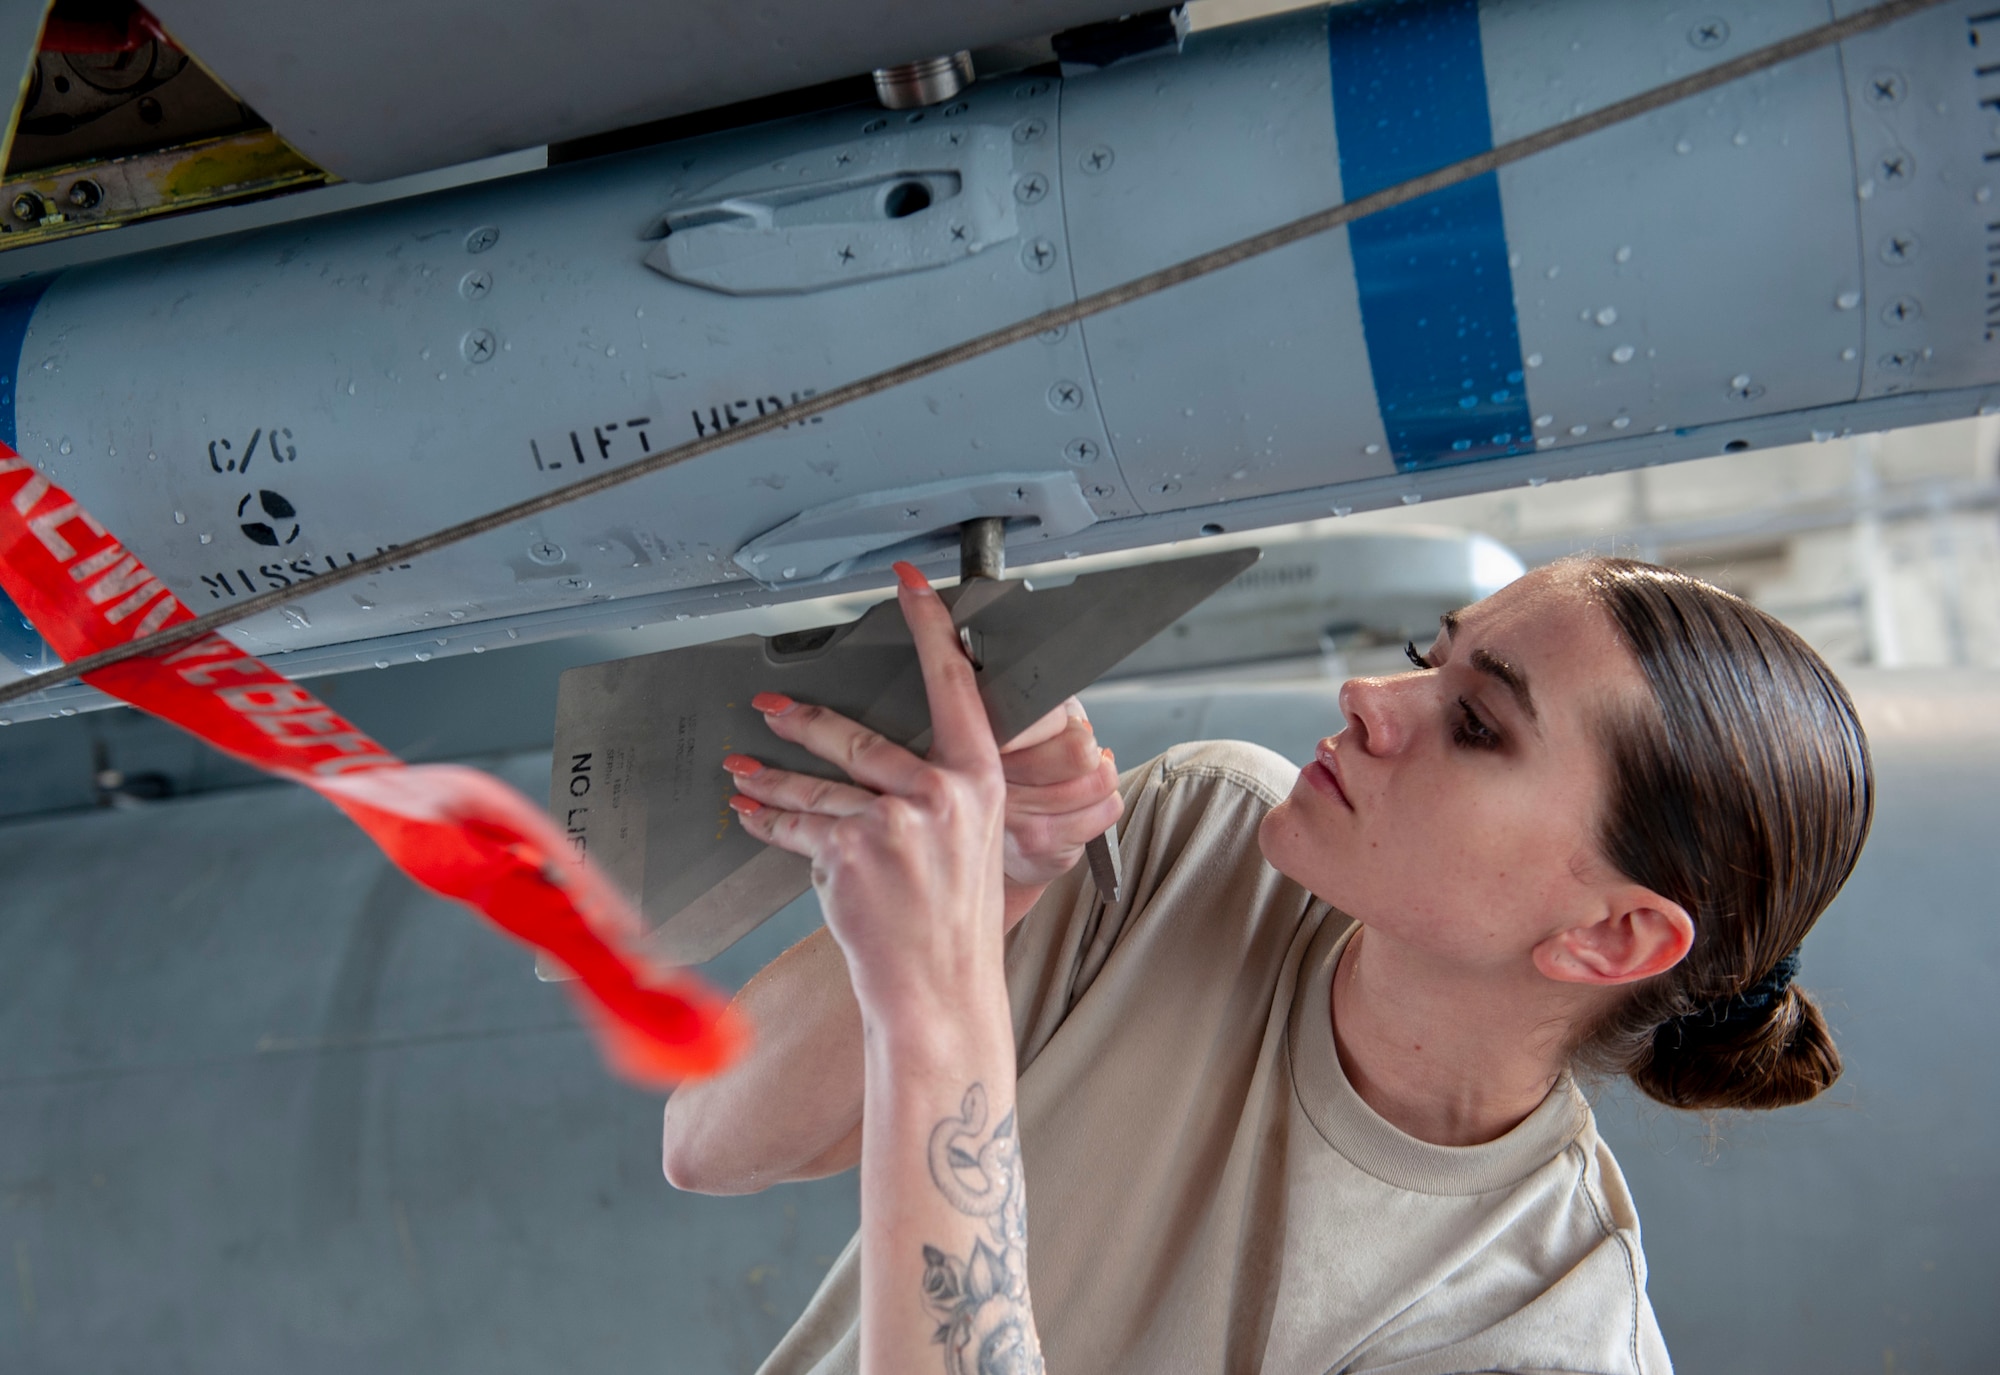 U.S. Air Force Airman 1st Class Amanda Allocca, 67th Aircraft Maintenance Unit load crew member, attaches the blade of an AIM-120 advanced medium-range air-to-air missile during the annual weapons load competition at Kadena Air Base, Japan, Jan. 17, 2020. Each team must load the munition onto an F-15C Eagle aircraft with speed and precision. (U.S. Air Force photo by Naoto Anazawa)